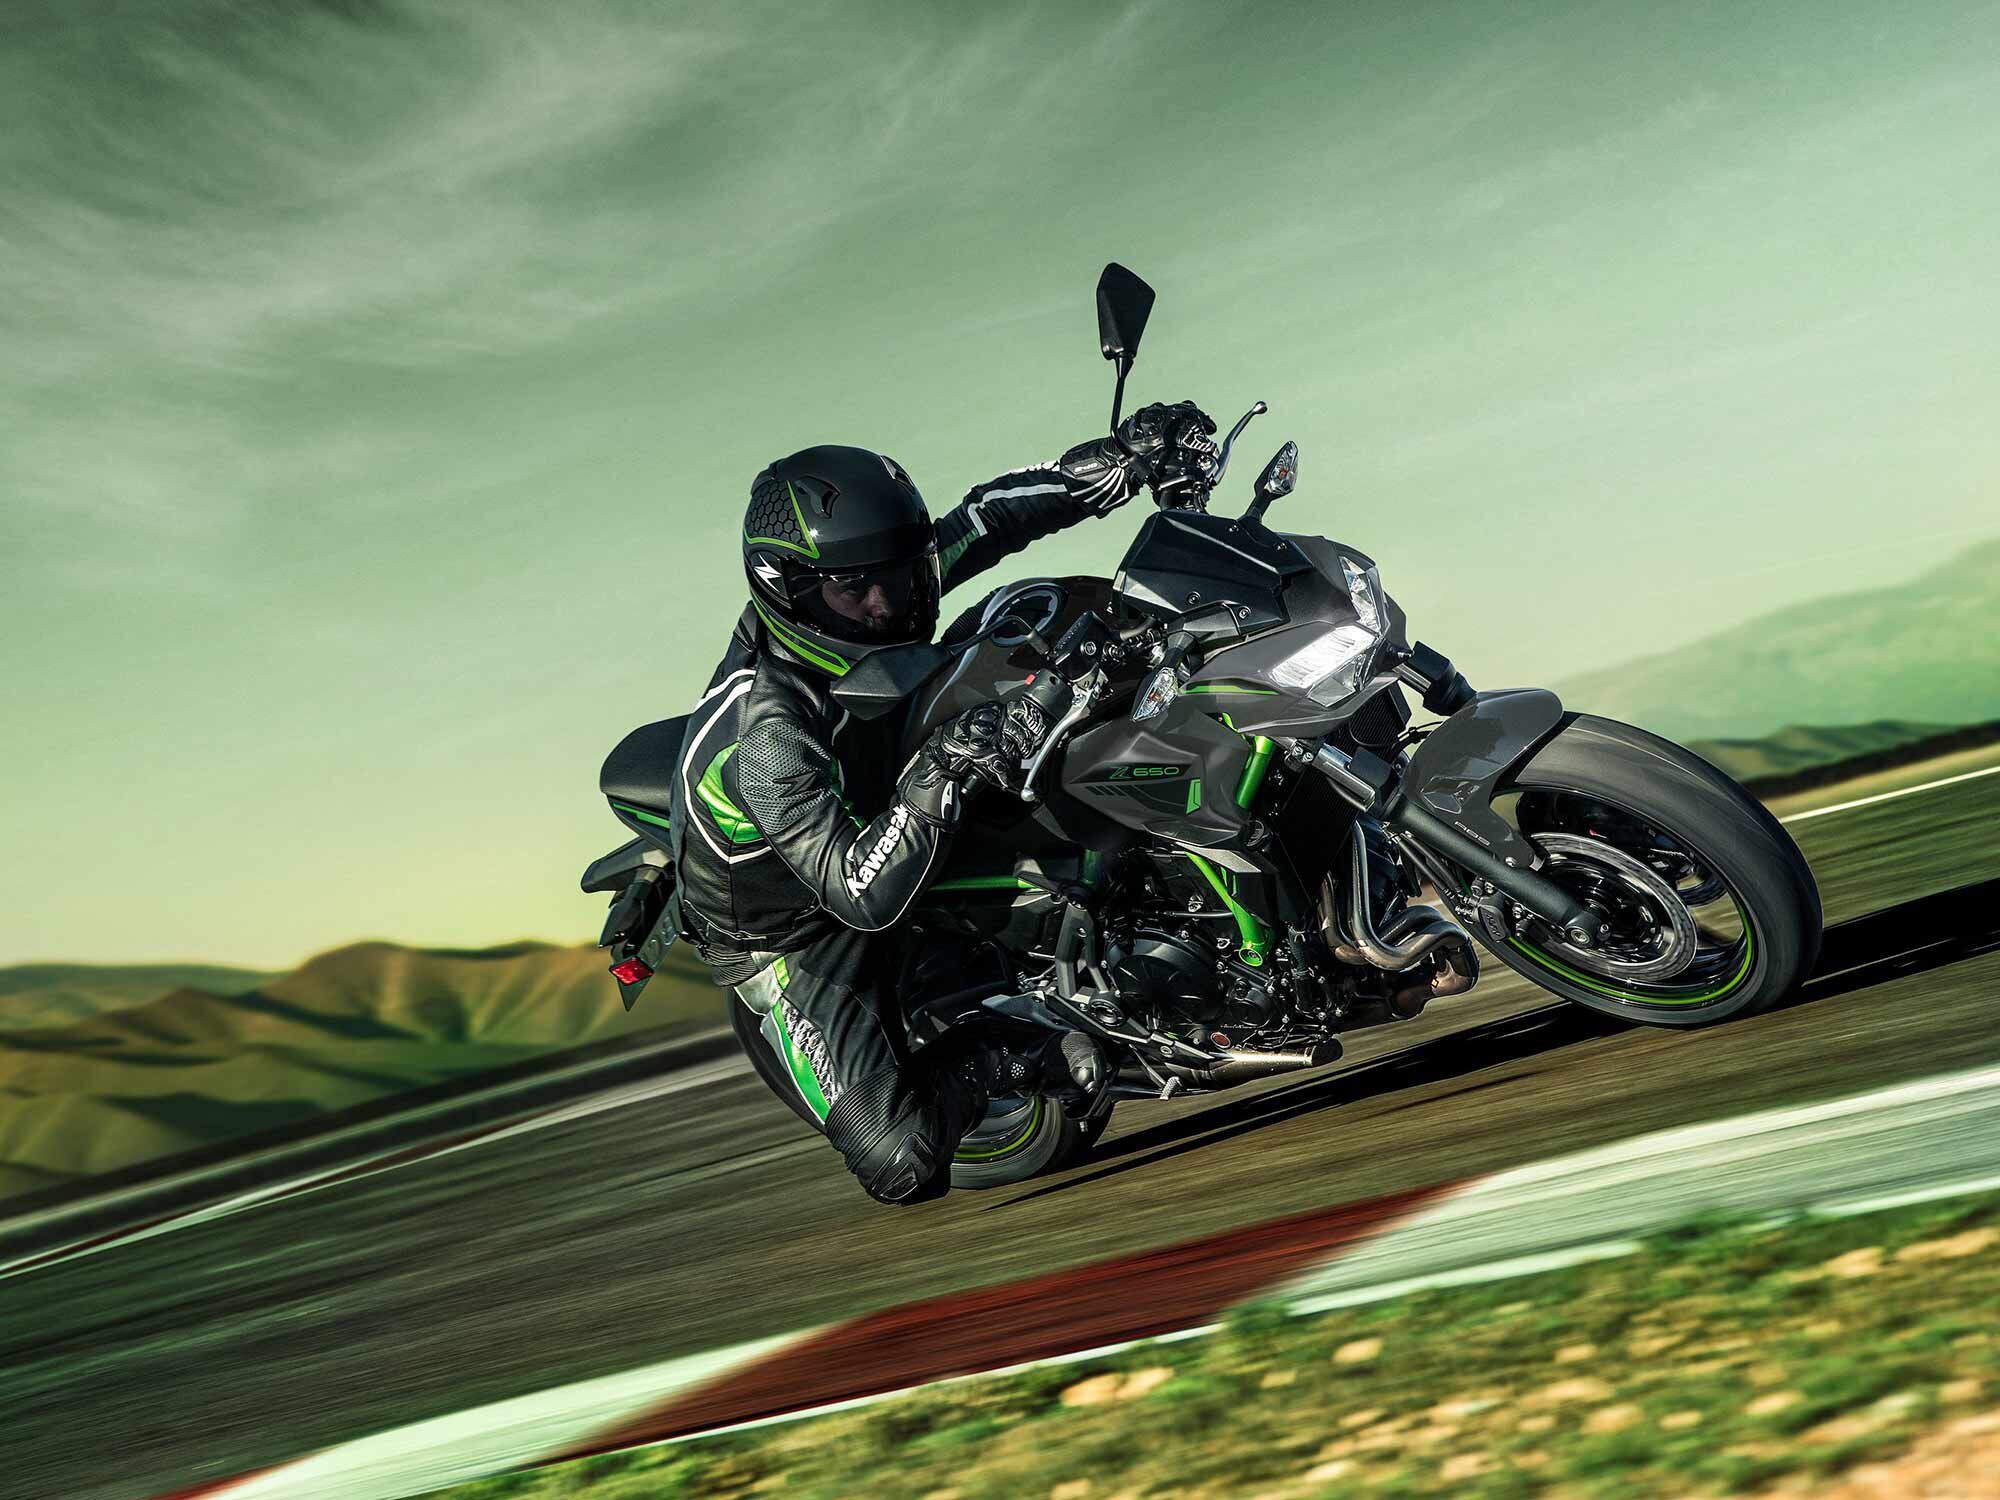 Kawasaki’s Z650 now comes standard with traction control.